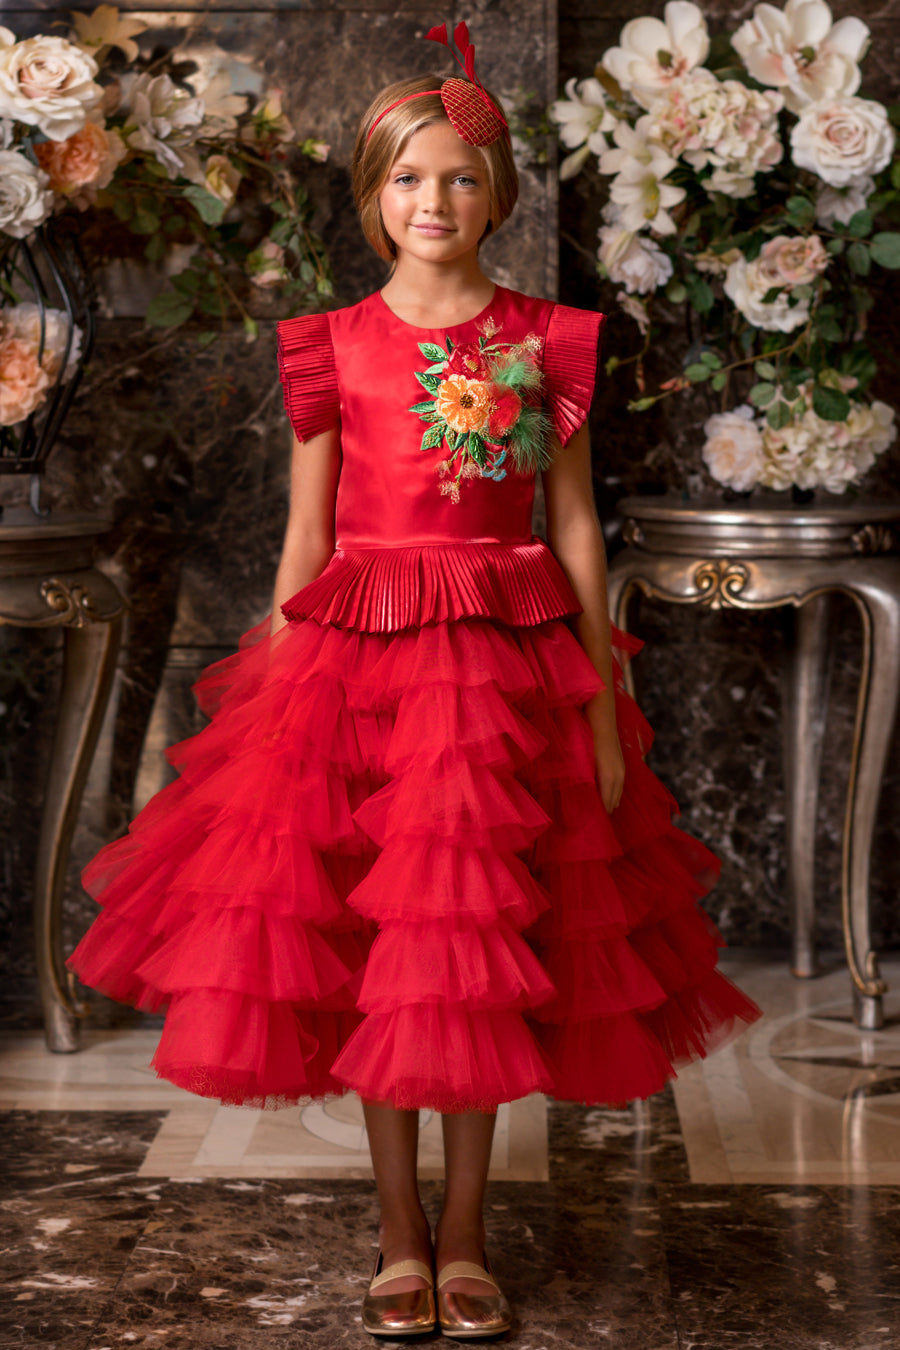 Red tulle dress with handmade embroidery and ruffles